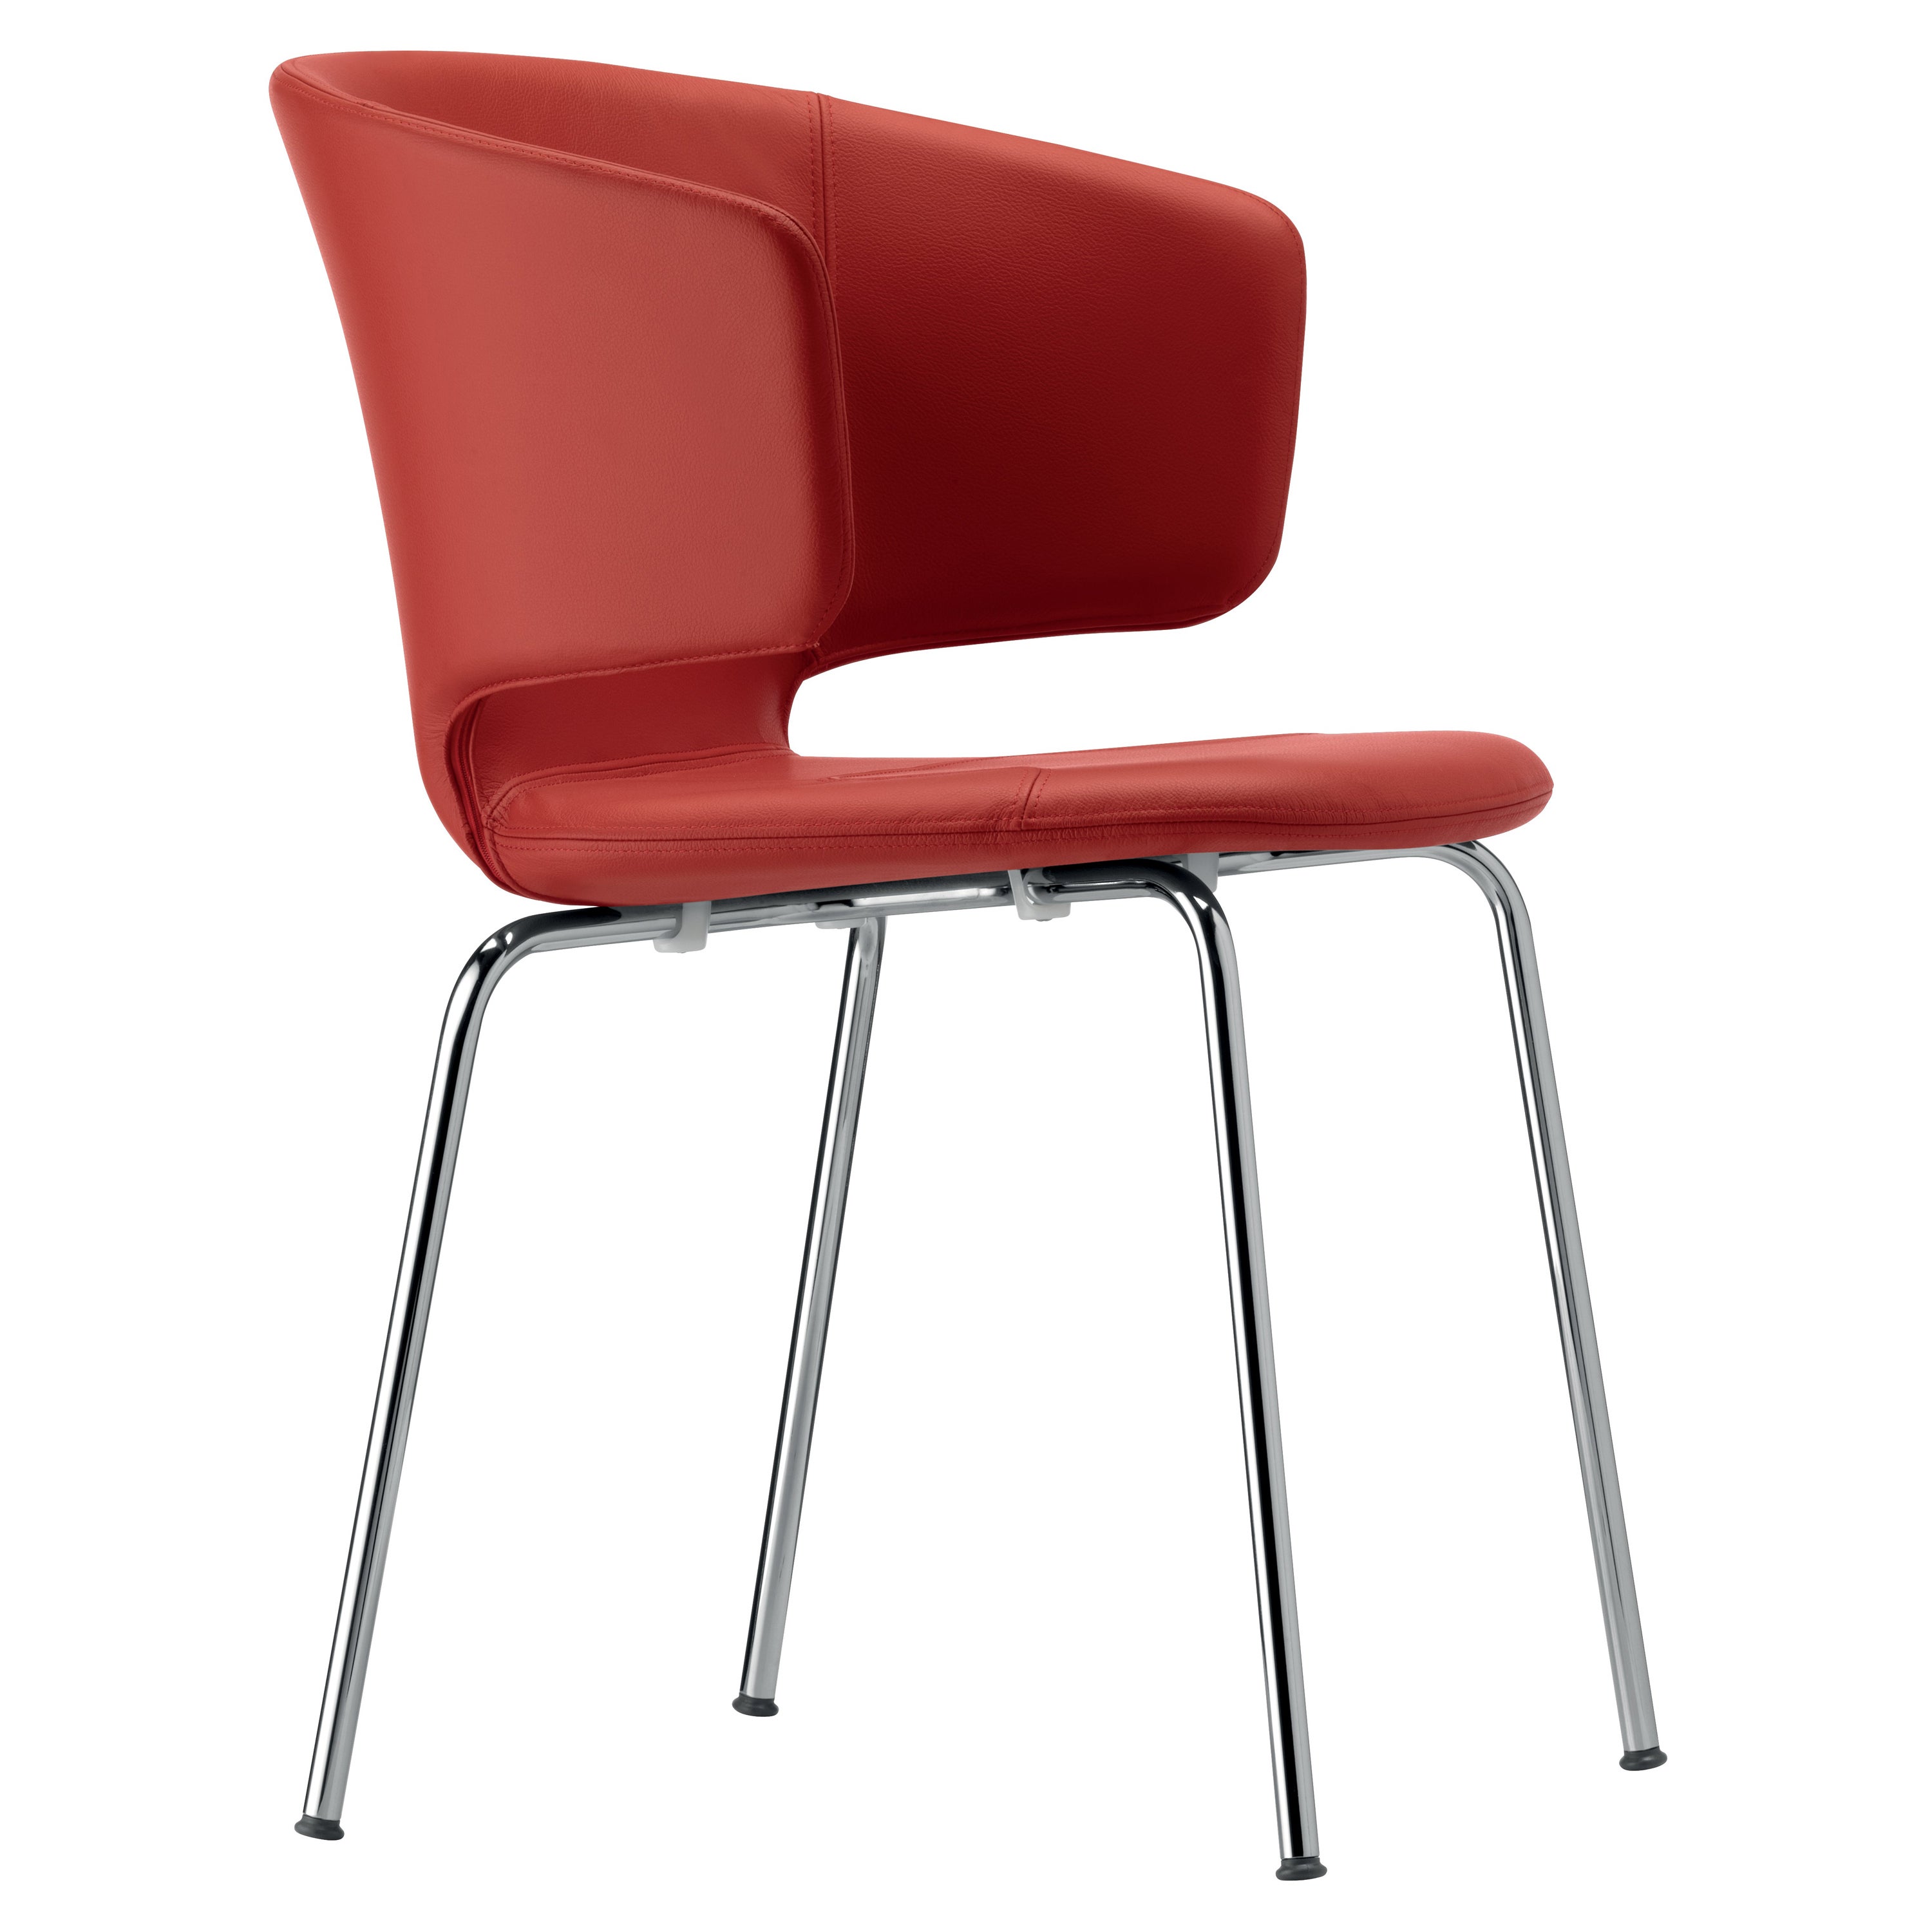 Alias 503 Taormina Chair in Red Seat and Chromed Steel Frame by Alfredo Häberli